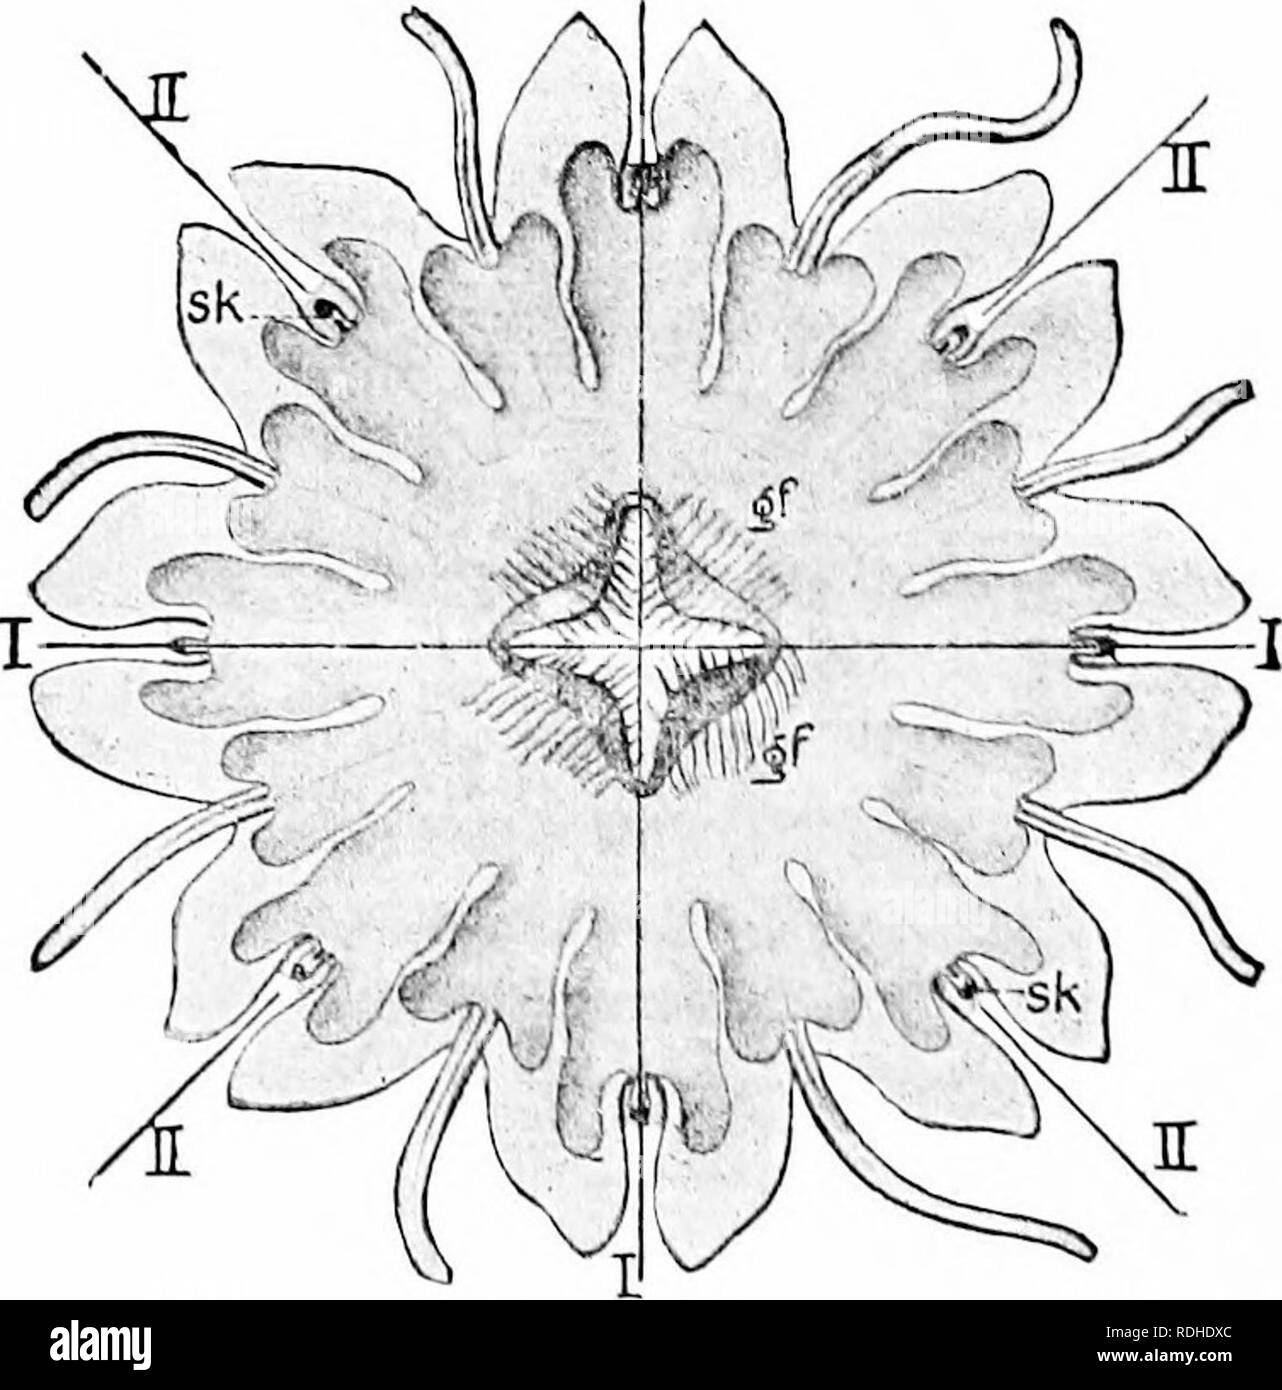 . A manual of zoology. Zoology. Fig. 89.—Ilaliomnia i-riiiac:us. a radiolarian, a. oxlcrnal, /, inlcrnal, latticed s|ihcrical skeleton; ck, central capsule; wk, exixa-capsular soft parts; 11, nucleus.. Fig. go.—Vouno; Clirysmwa (after Clans'). 1, perradii; II, iiUerradii; (;/, gaslral lilaments; sk, sensor- pedicels. through the main axis and cither of the others will divide the animal symmet- rically. Corals, sea anemones and ctenophores belong here. Bilateral symmetry has the same three axes, the two ends of the main or longitudinal axis being dissimilar, as well as those of the sagittal ax Stock Photo